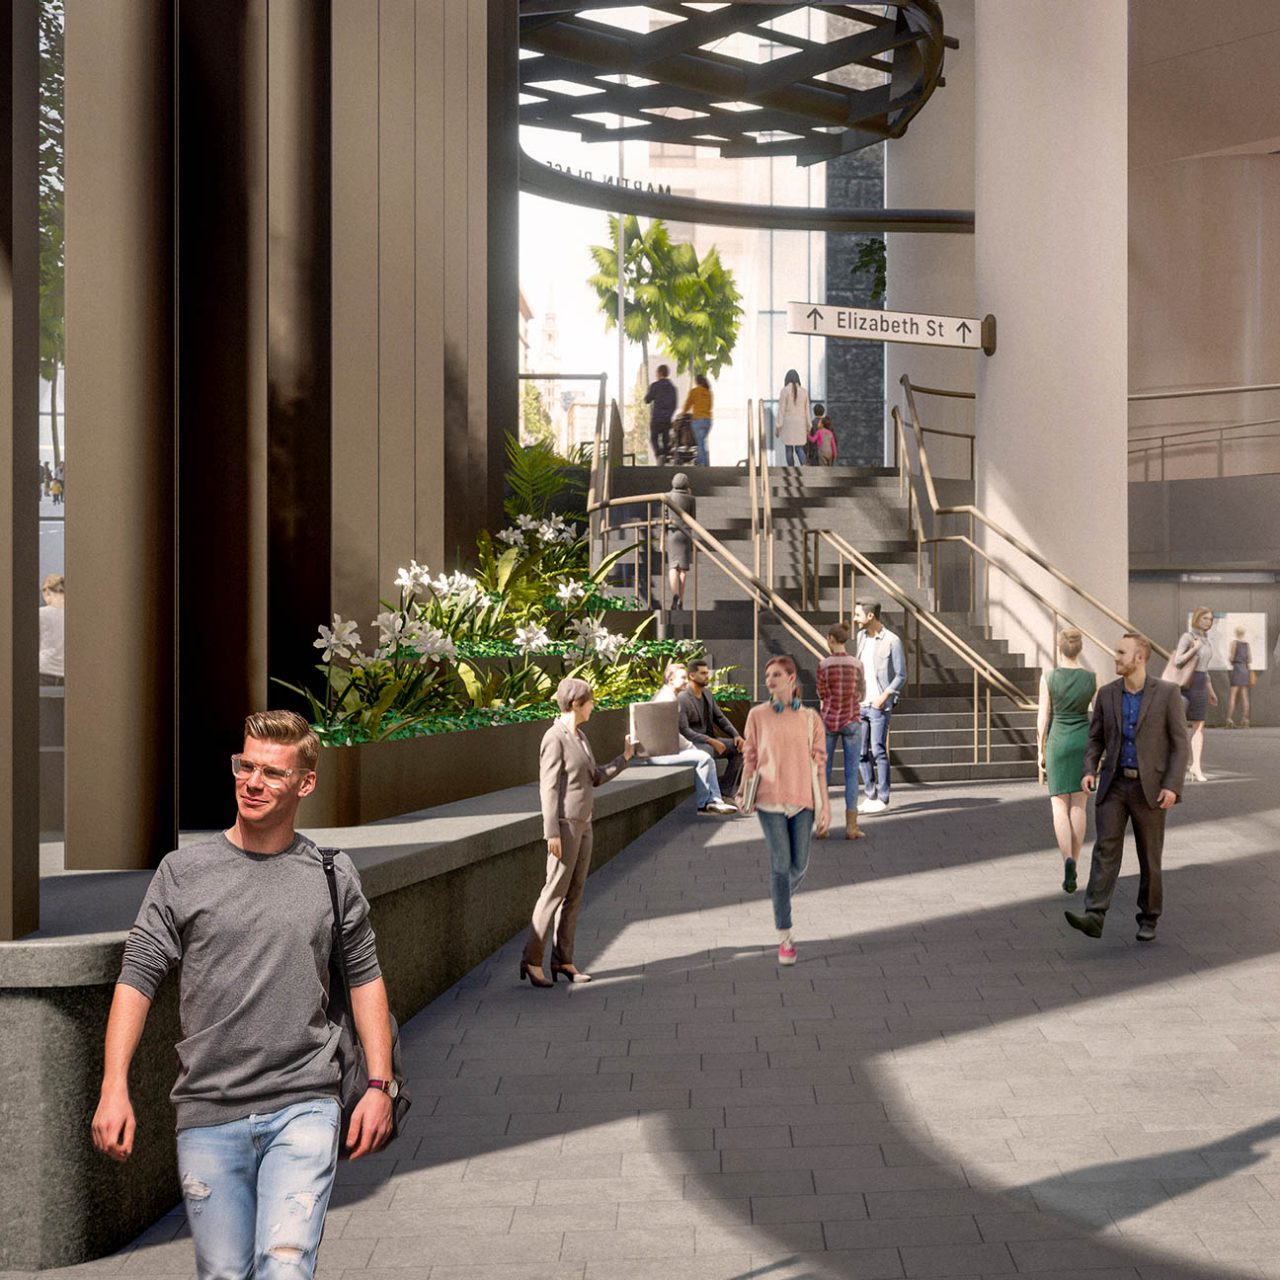 Artist's impression of north atrium ground floor, showing publically accessible space with native plantings